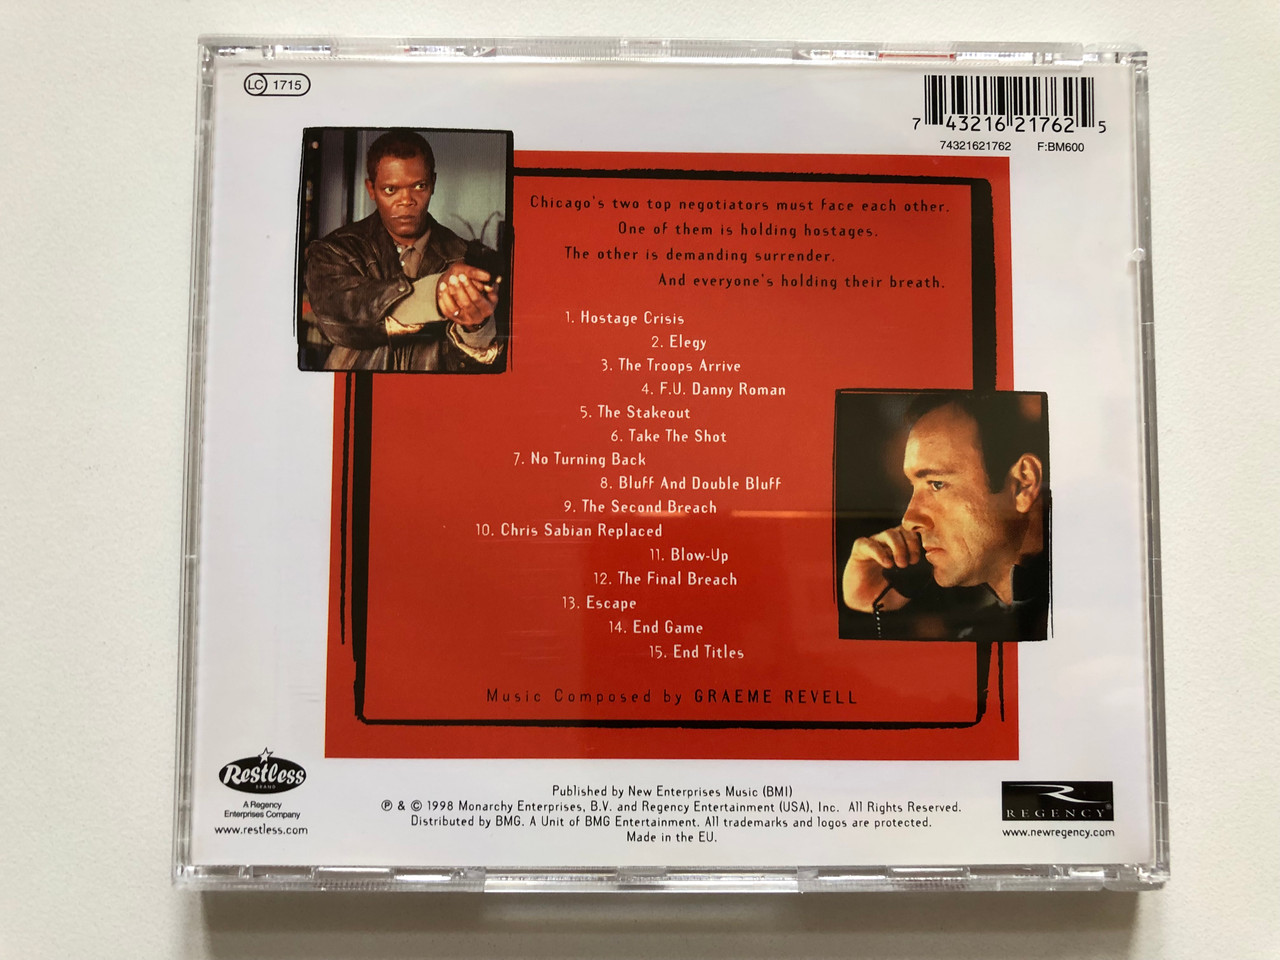 https://cdn10.bigcommerce.com/s-62bdpkt7pb/products/0/images/313285/Samuel_L._Jackson_Kevin_Spacey_The_Negotiator_Original_Motion_Picture_Score_-_Music_Composed_By_Graeme_Revell_Restless_Records_Audio_CD_1998_74321621762_2__61027.1700663282.1280.1280.JPG?c=2